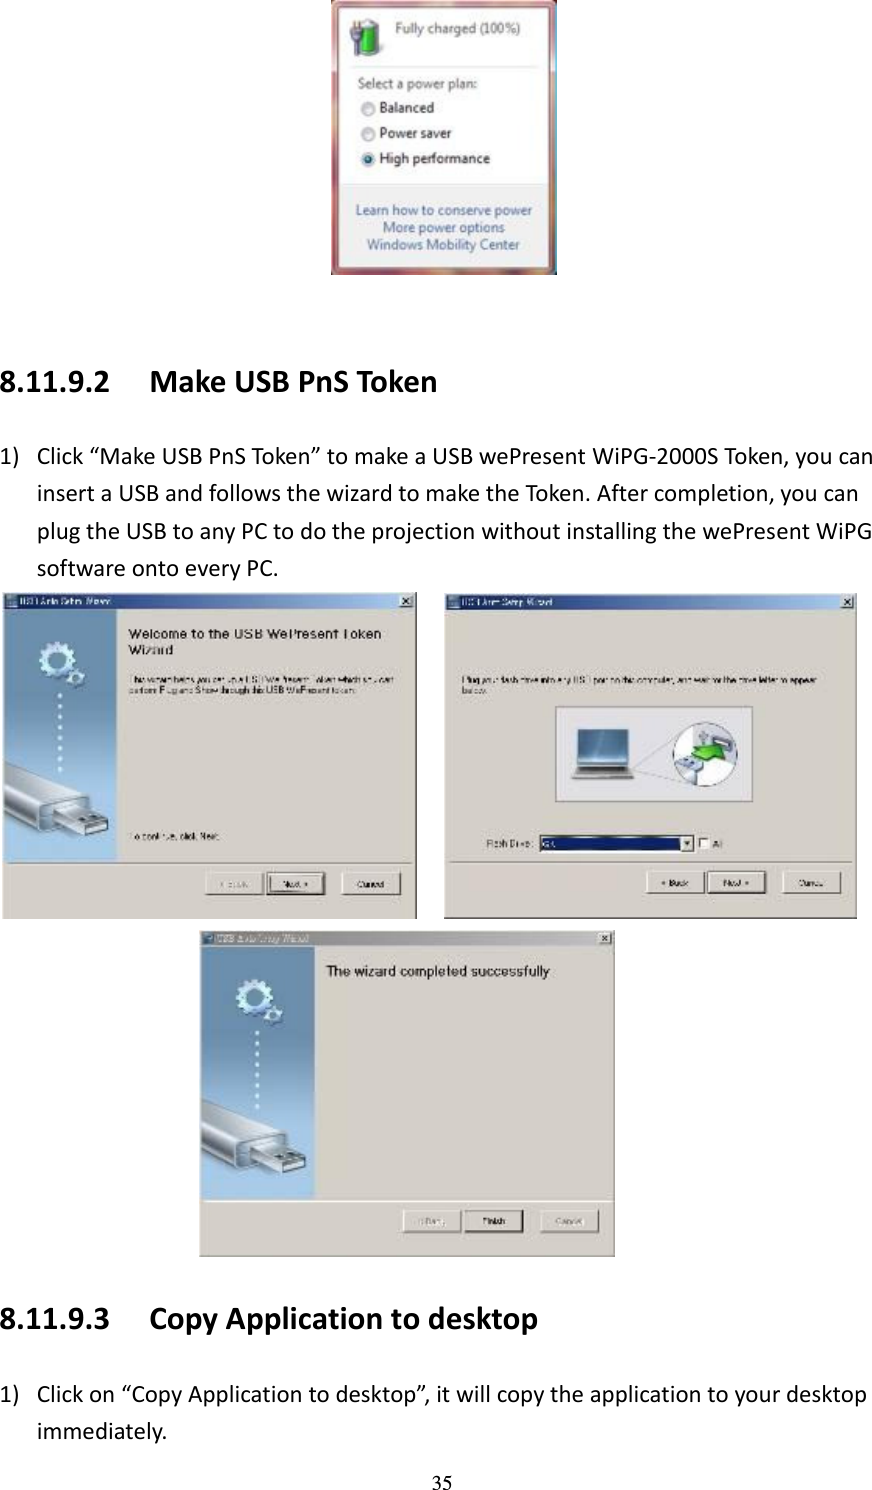   35   8.11.9.2 Make USB PnS Token 1) Click “Make USB PnS Token” to make a USB wePresent WiPG-2000S Token, you can insert a USB and follows the wizard to make the Token. After completion, you can plug the USB to any PC to do the projection without installing the wePresent WiPG software onto every PC.     8.11.9.3 Copy Application to desktop 1) Click on “Copy Application to desktop”, it will copy the application to your desktop immediately.   